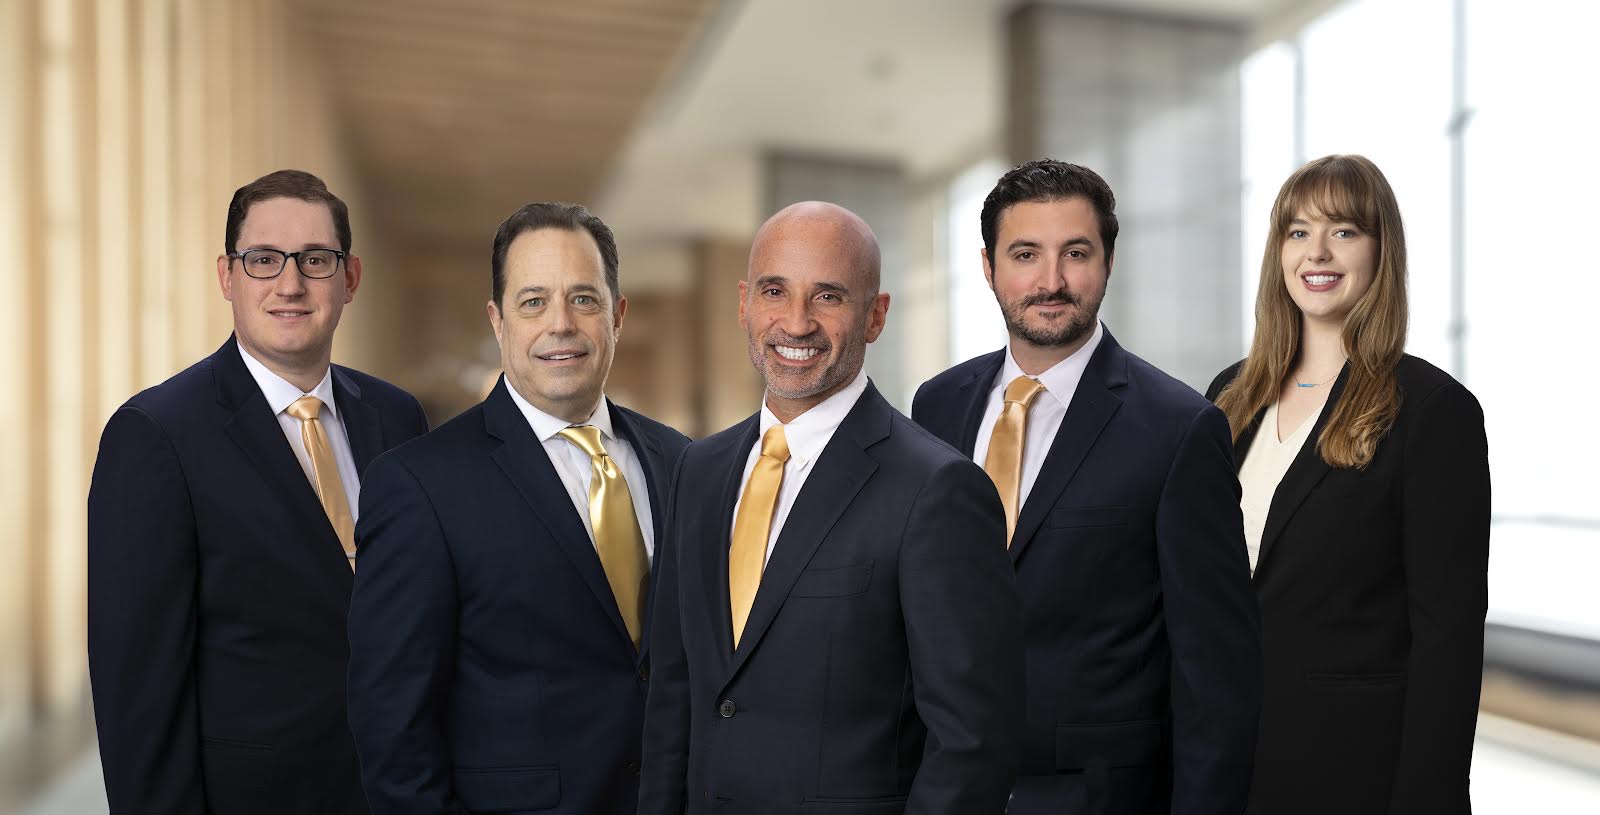 5 lawyers stand in a row in suits